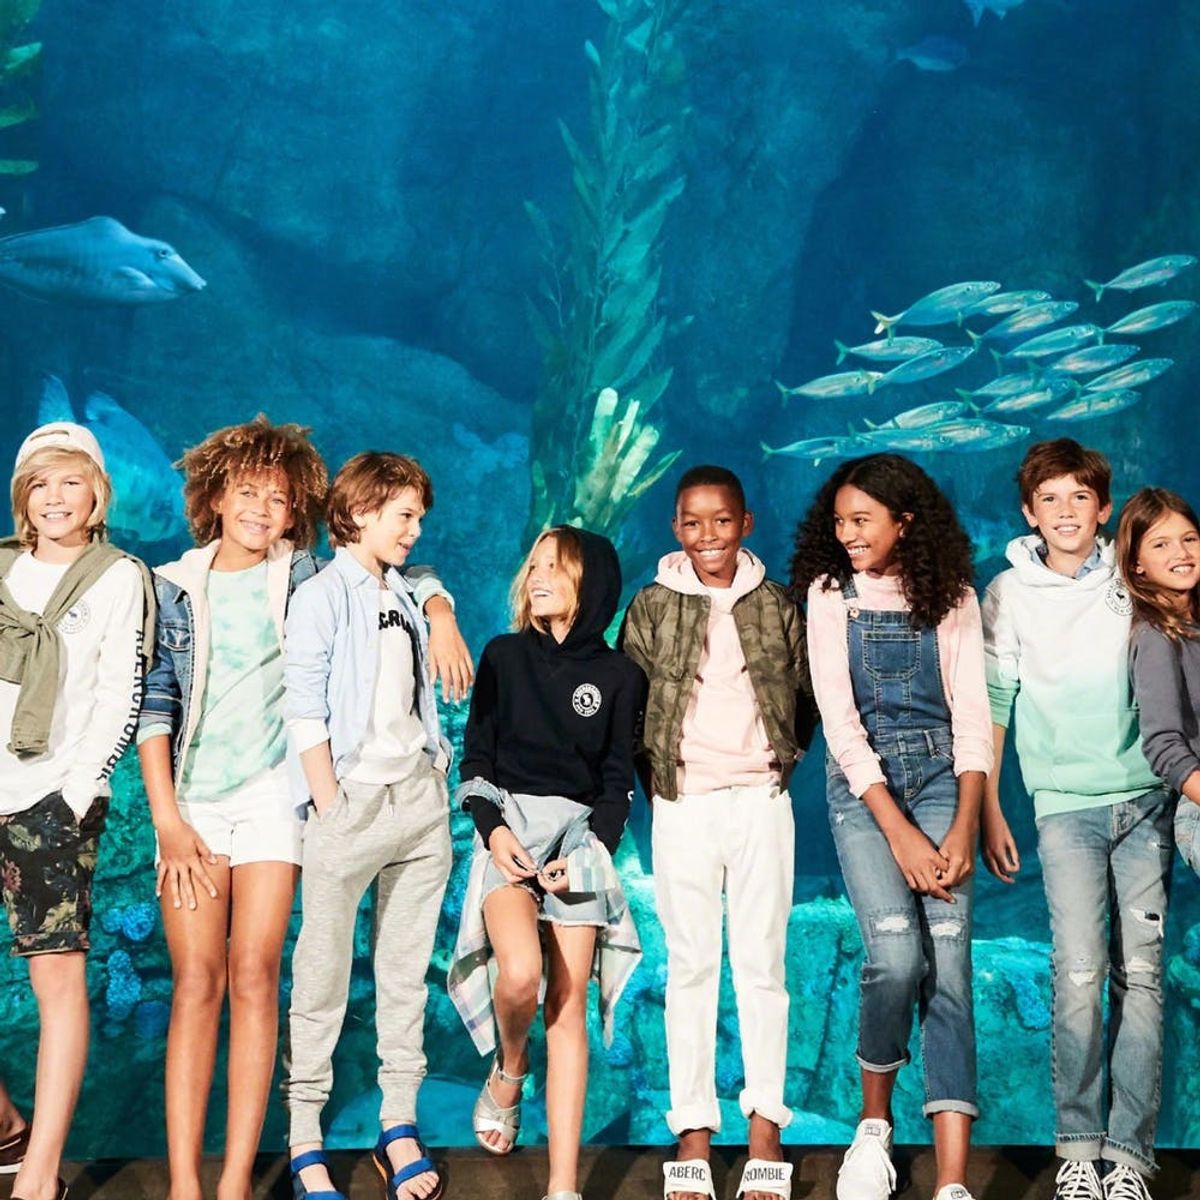 Abercrombie & Fitch Is Introducing Its First Gender-Neutral Kids’ Collection